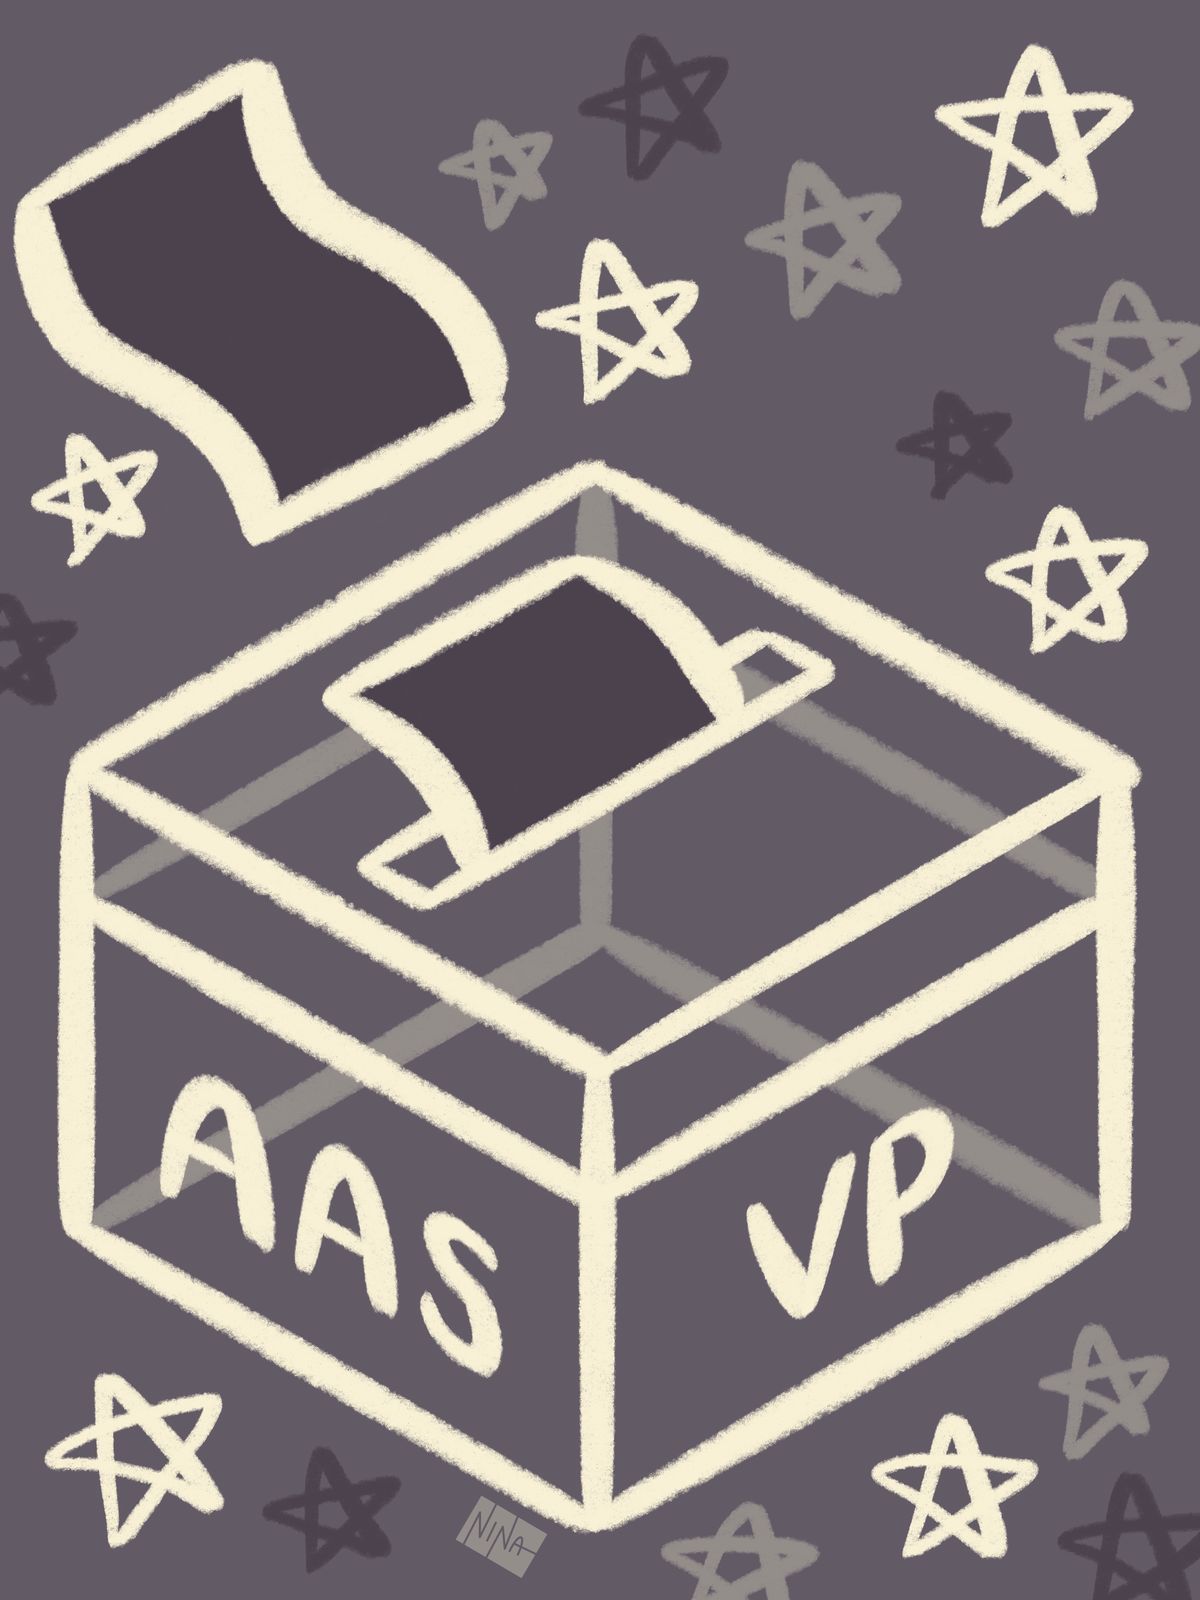 Special Election: AAS Vice President Candidate Statements